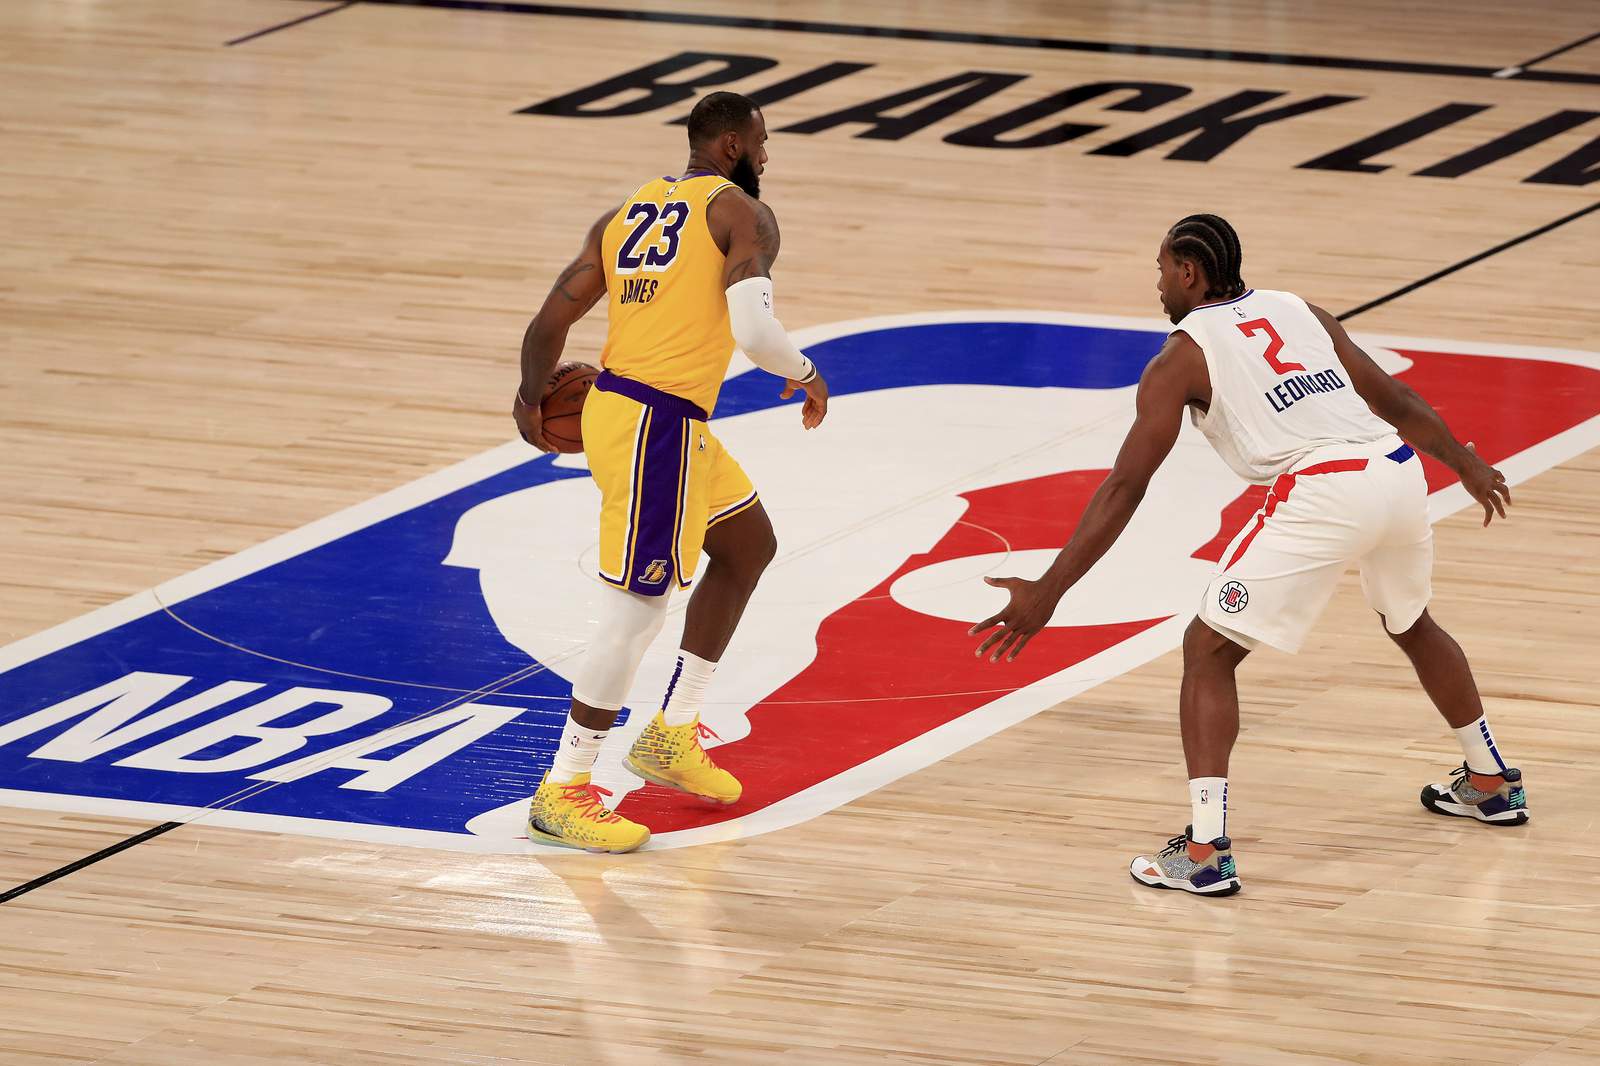 James' layup late lifts Lakers past Clippers, 103-101